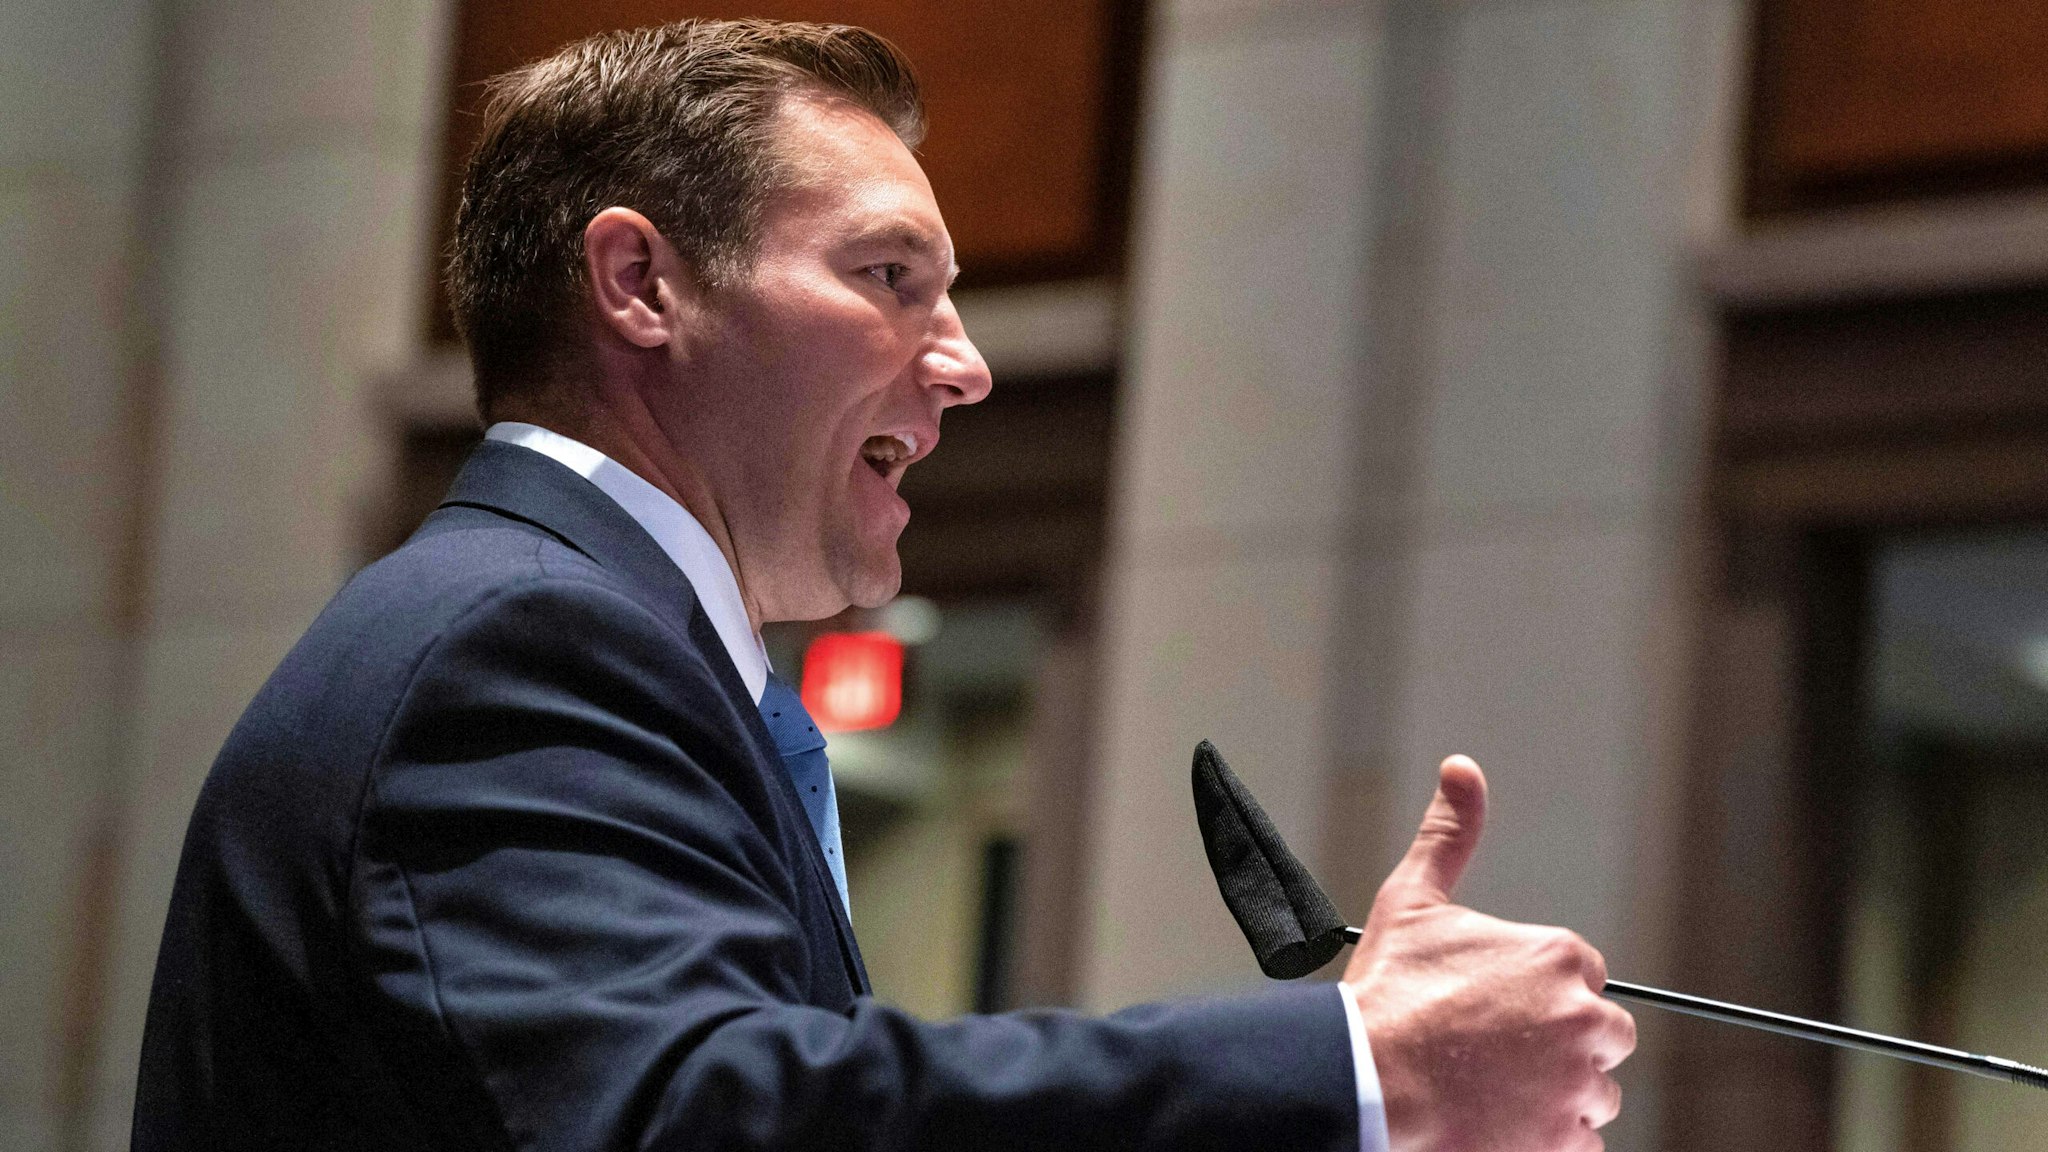 Republican Representative from Pennsylvania Guy Reschenthaler defends an amendment to the bill during a House Judiciary Committee markup on H.R. 7120 the "Justice in Policing Act of 2020," at the US Capitol in Washington, DC, on June 17, 2020.